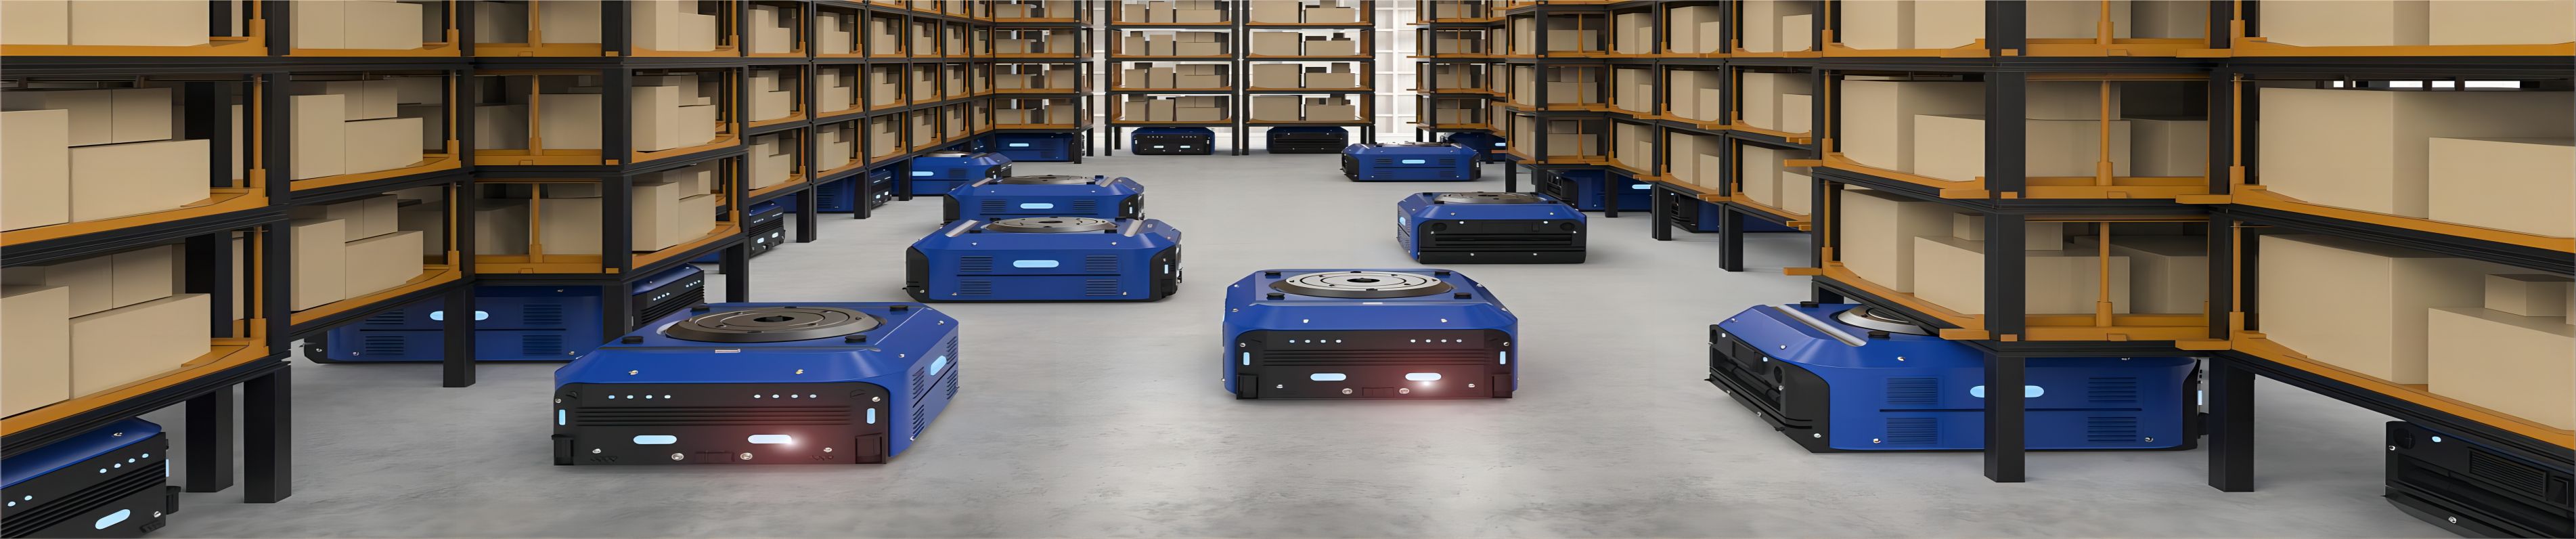 AGV - Automated Guided Vehicle